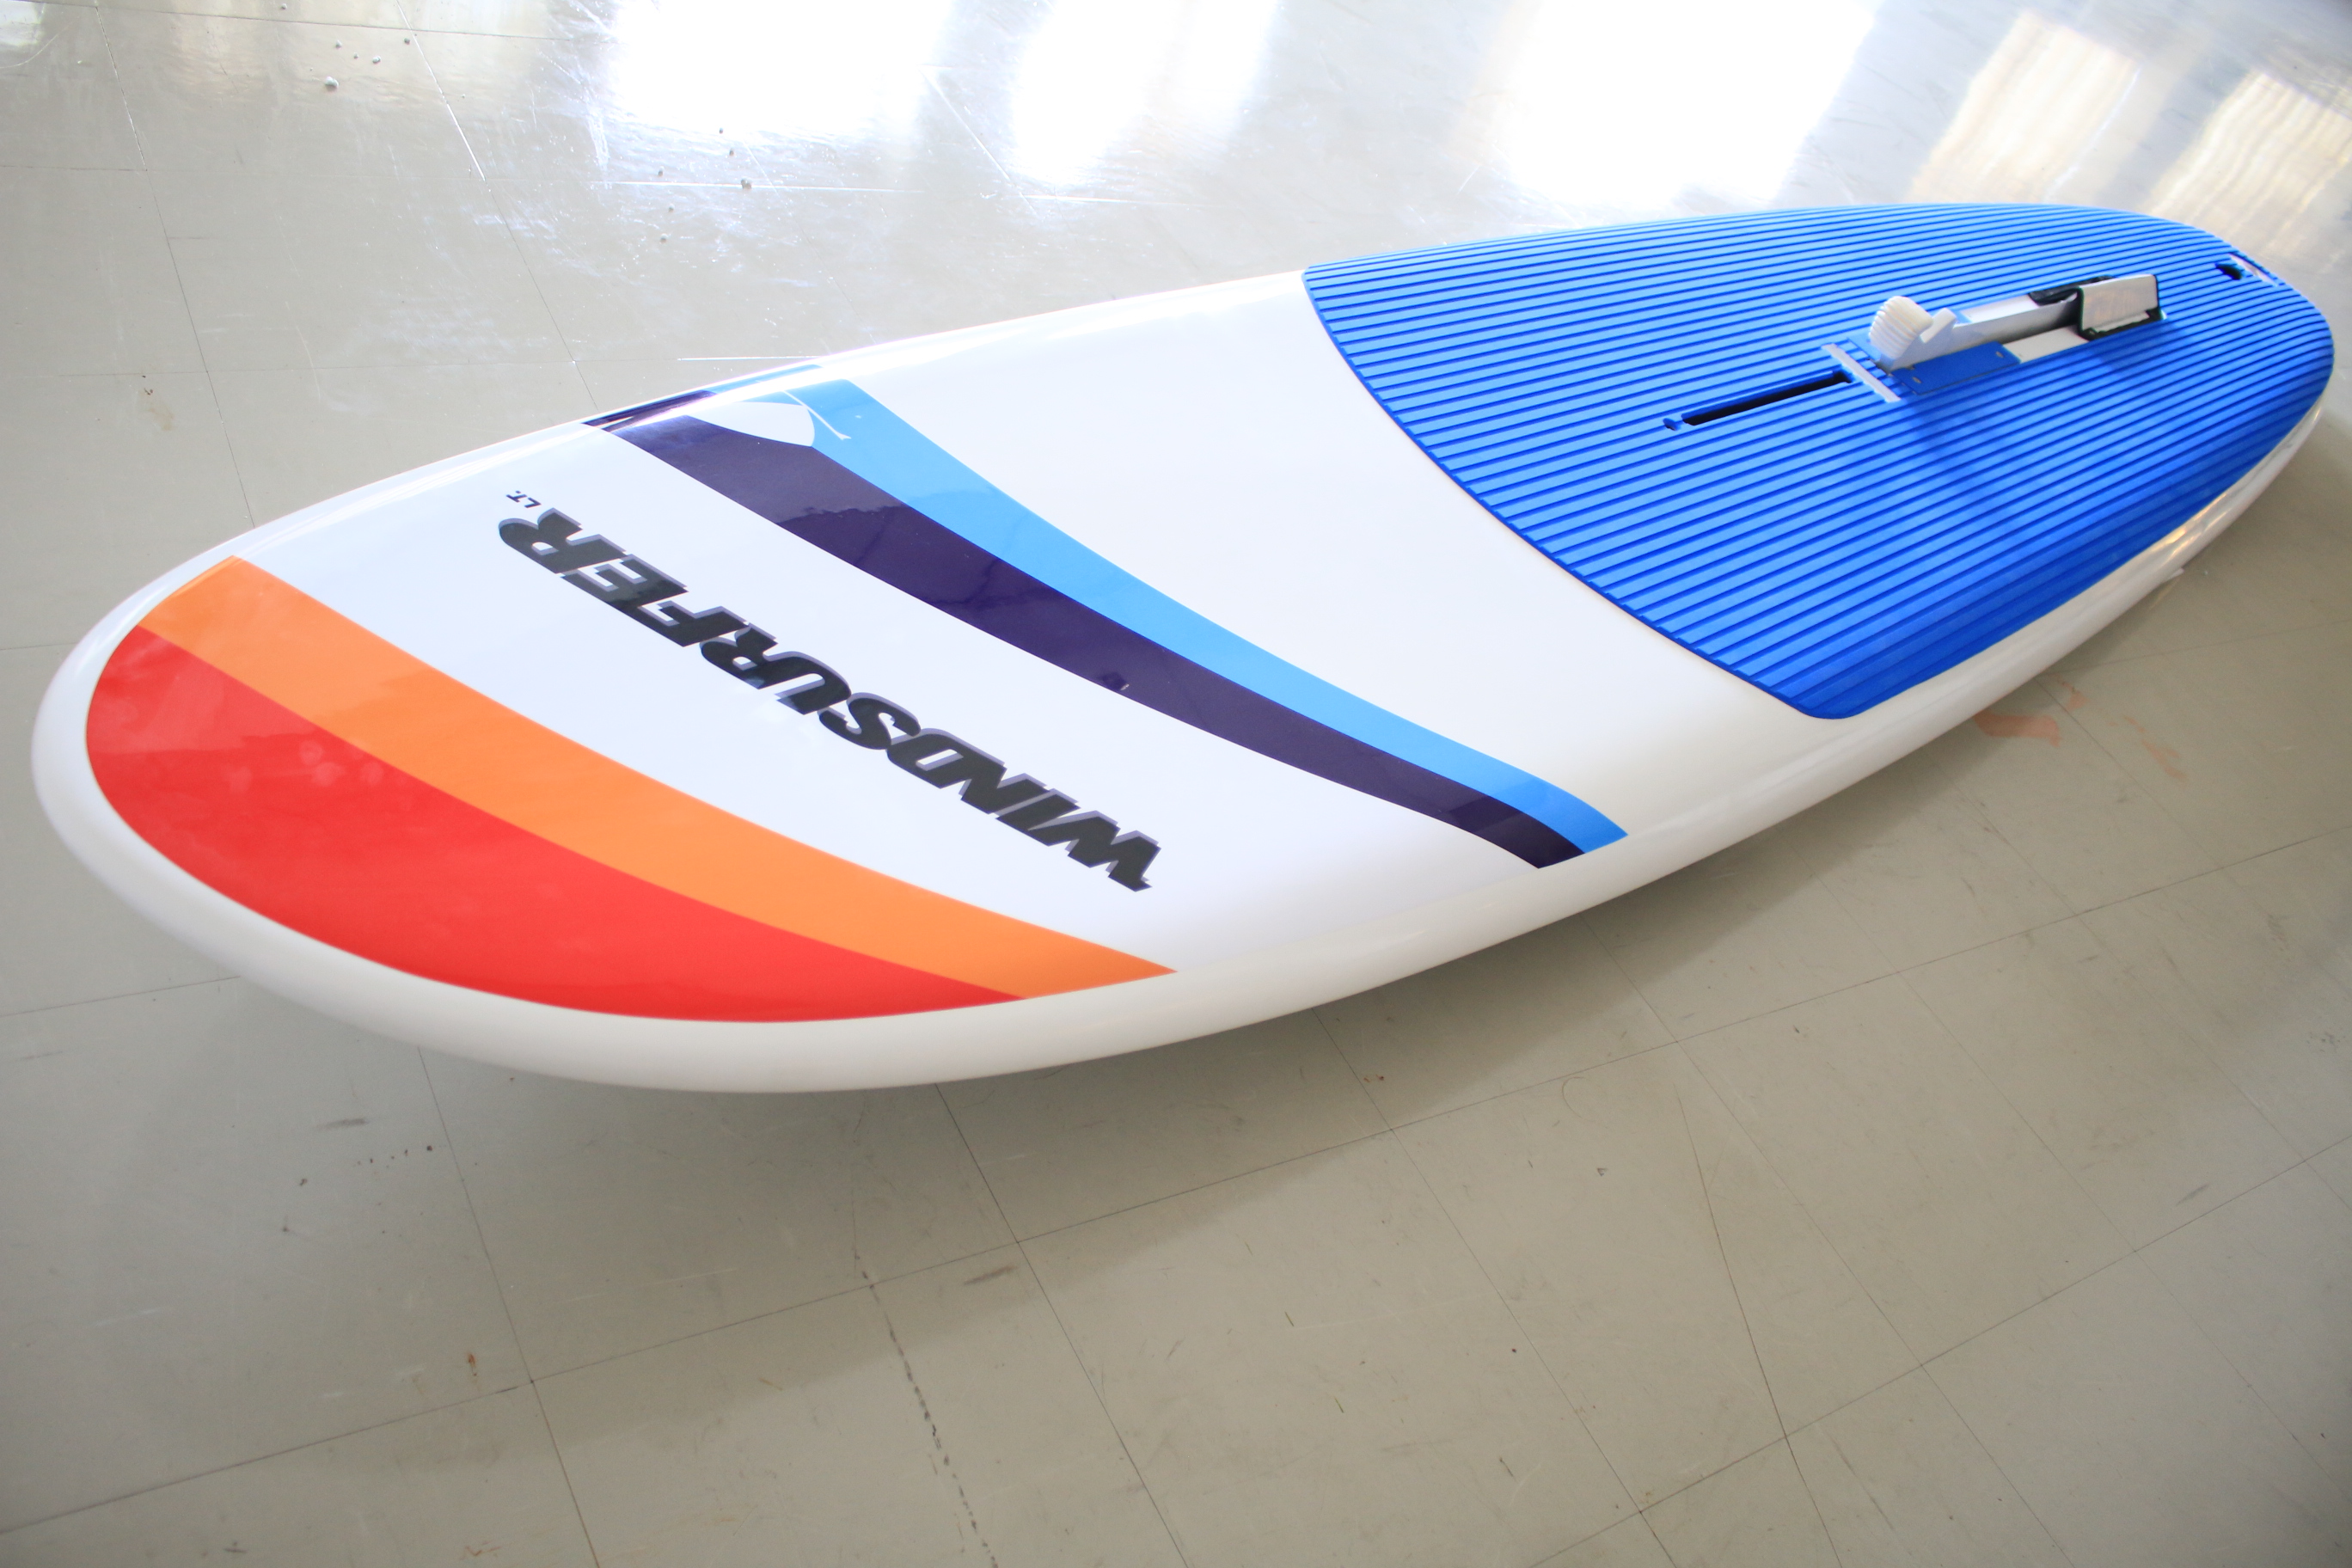 The board can be raced, used for teaching or freestyle and even paddled as a stand-up paddleboard on no wind days.